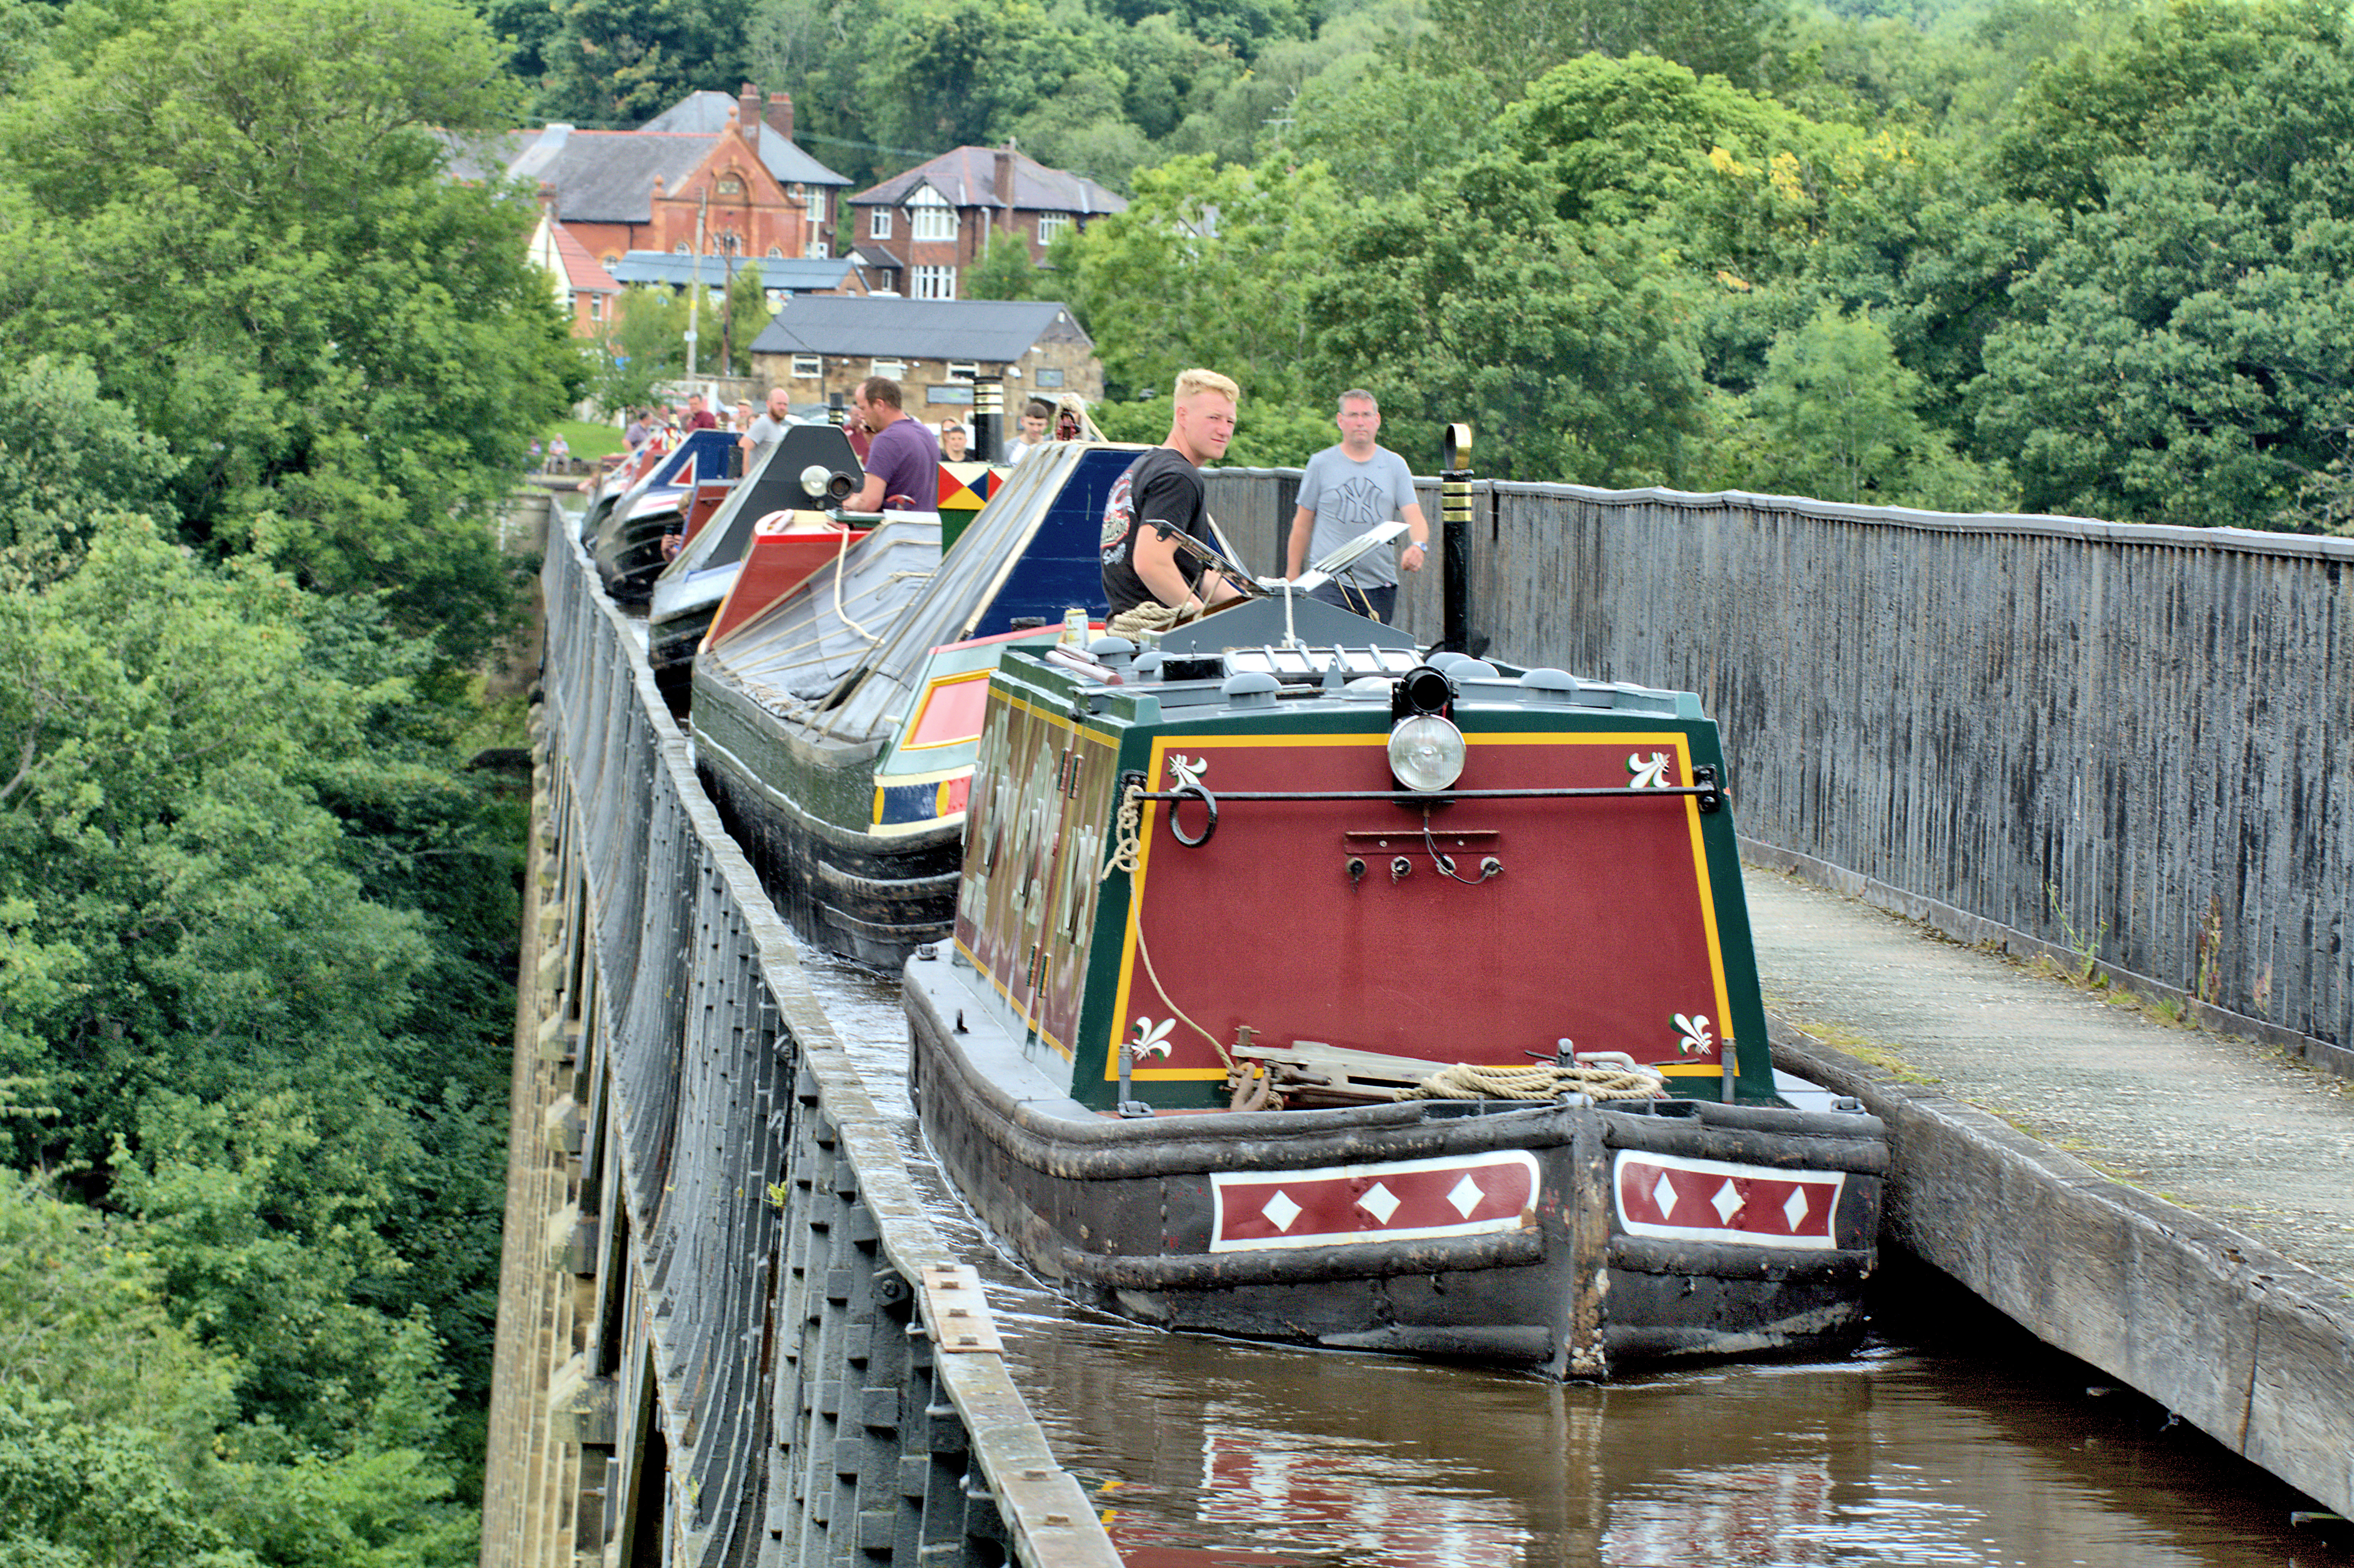 July 2020 Calendar image - 5 historic boats led by Governor across the Pontcysyllte Aqueduct by Kevin Maslin